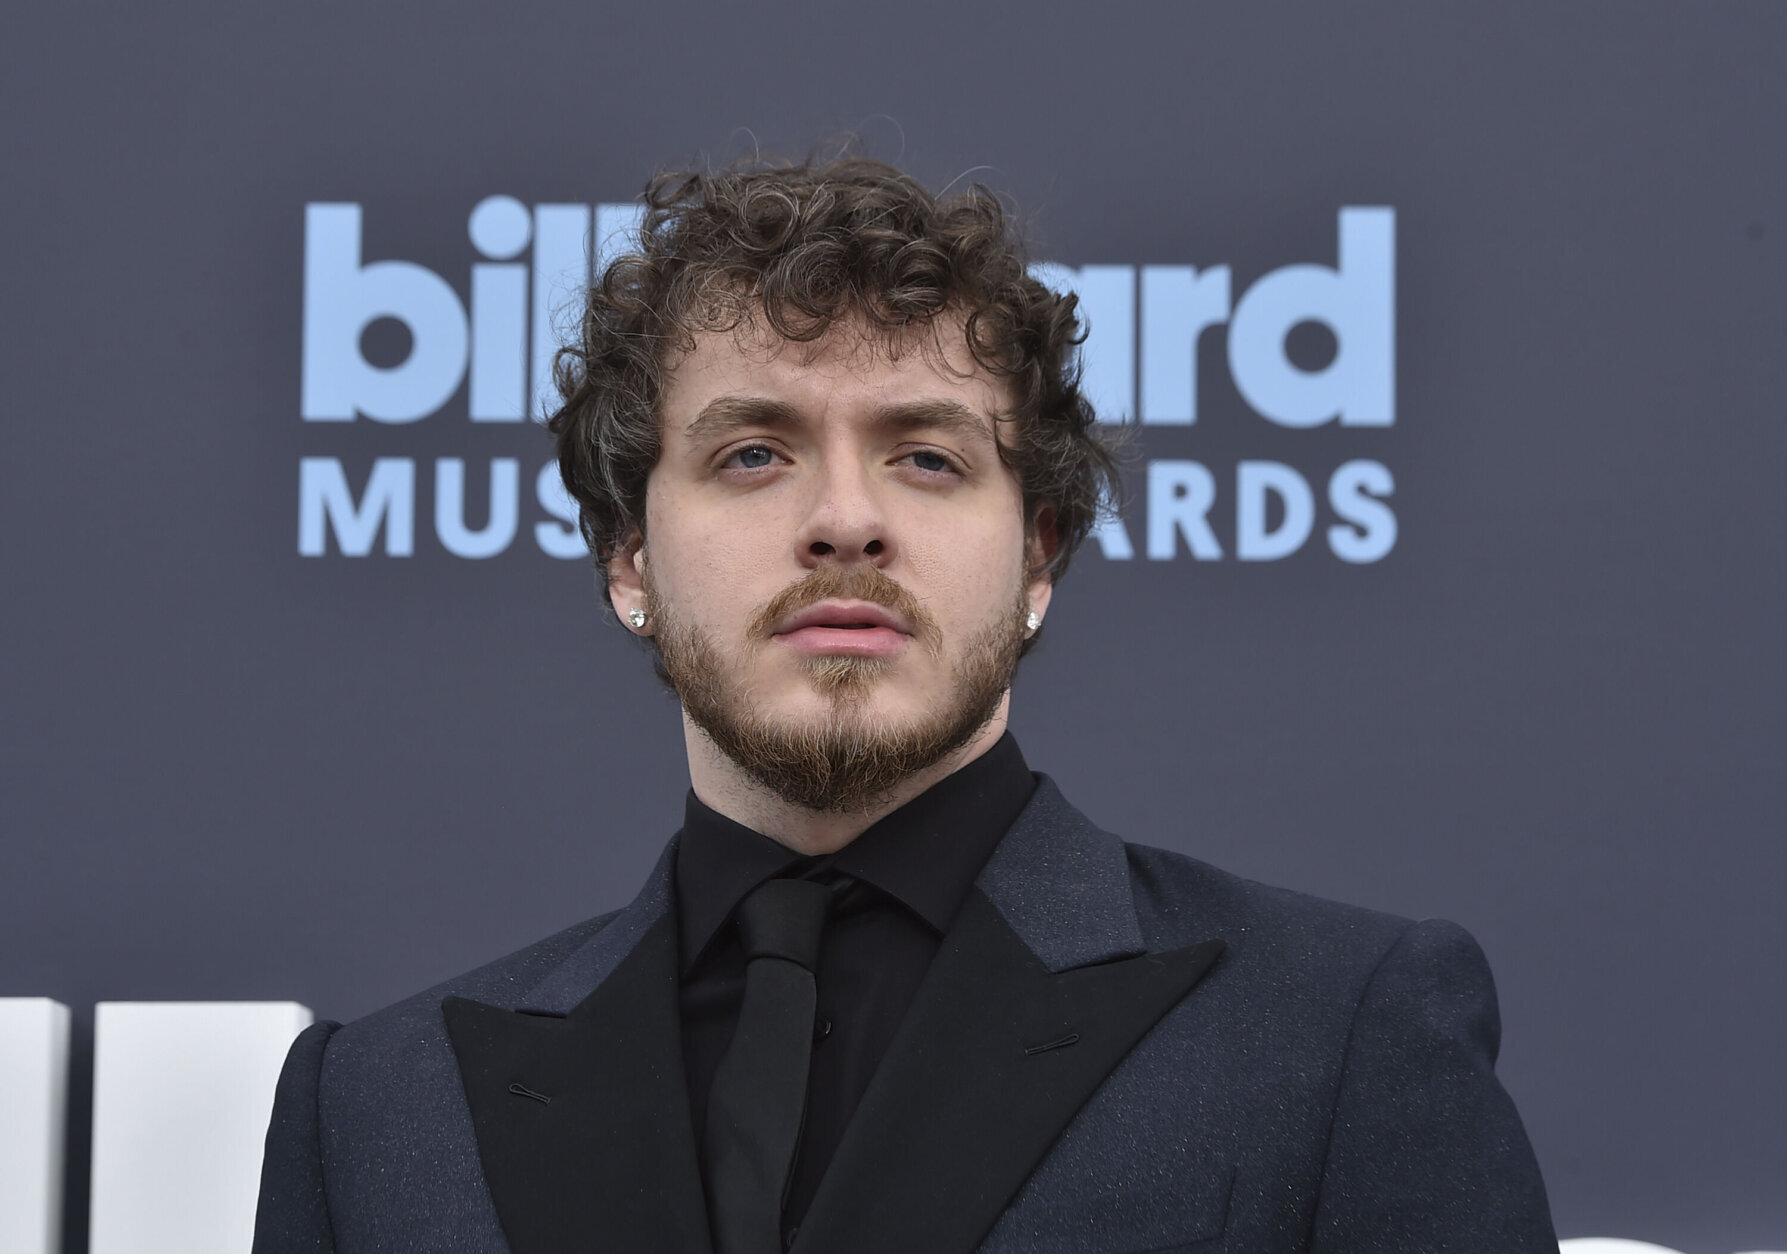 Jack Harlow arrives at the Billboard Music Awards on Sunday, May 15, 2022, at the MGM Grand Garden Arena in Las Vegas. (Photo by Jordan Strauss/Invision/AP)